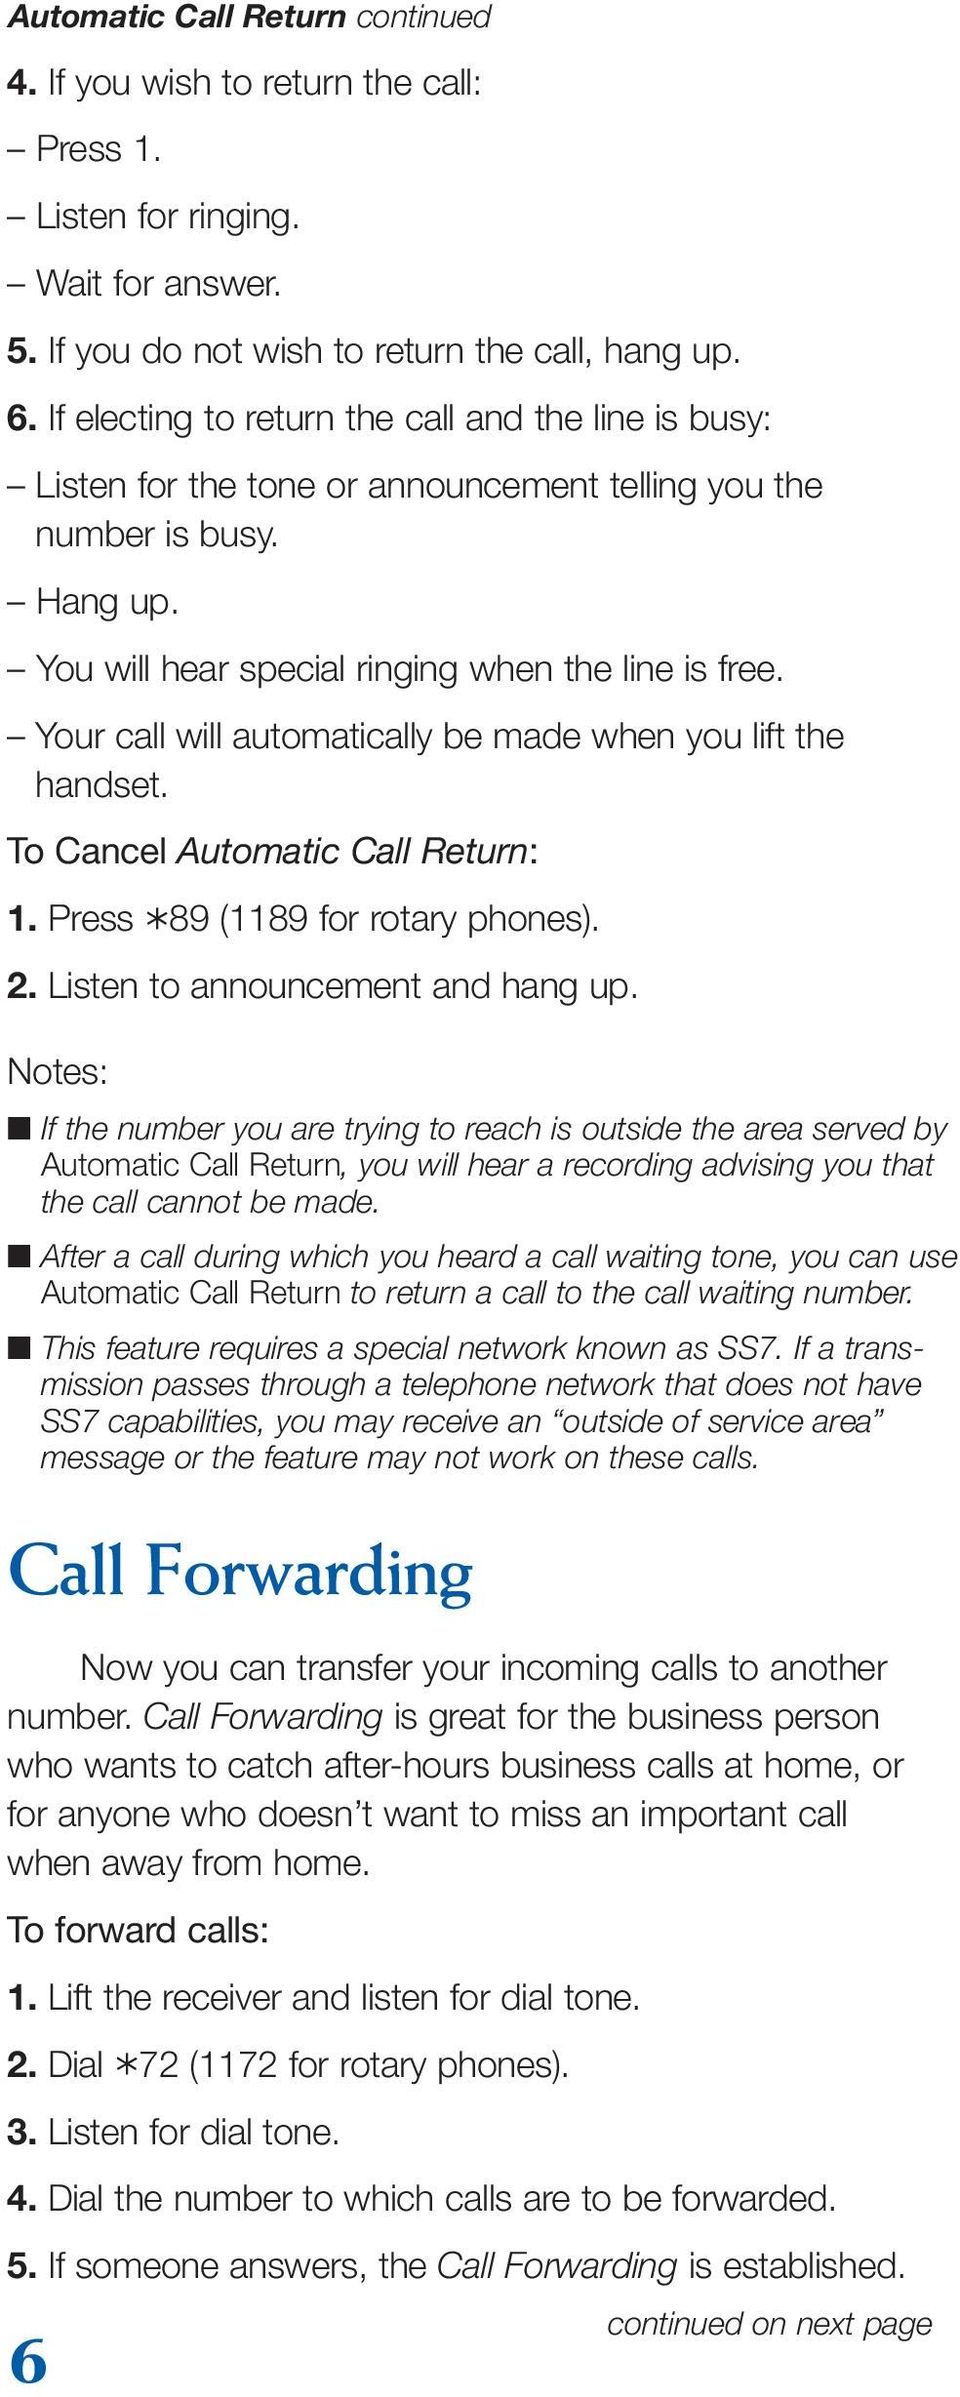 Your call will automatically be made when you lift the handset. To Cancel Automatic Call Return: 1. Press 89 (1189 for rotary phones). 2. Listen to announcement and hang up.